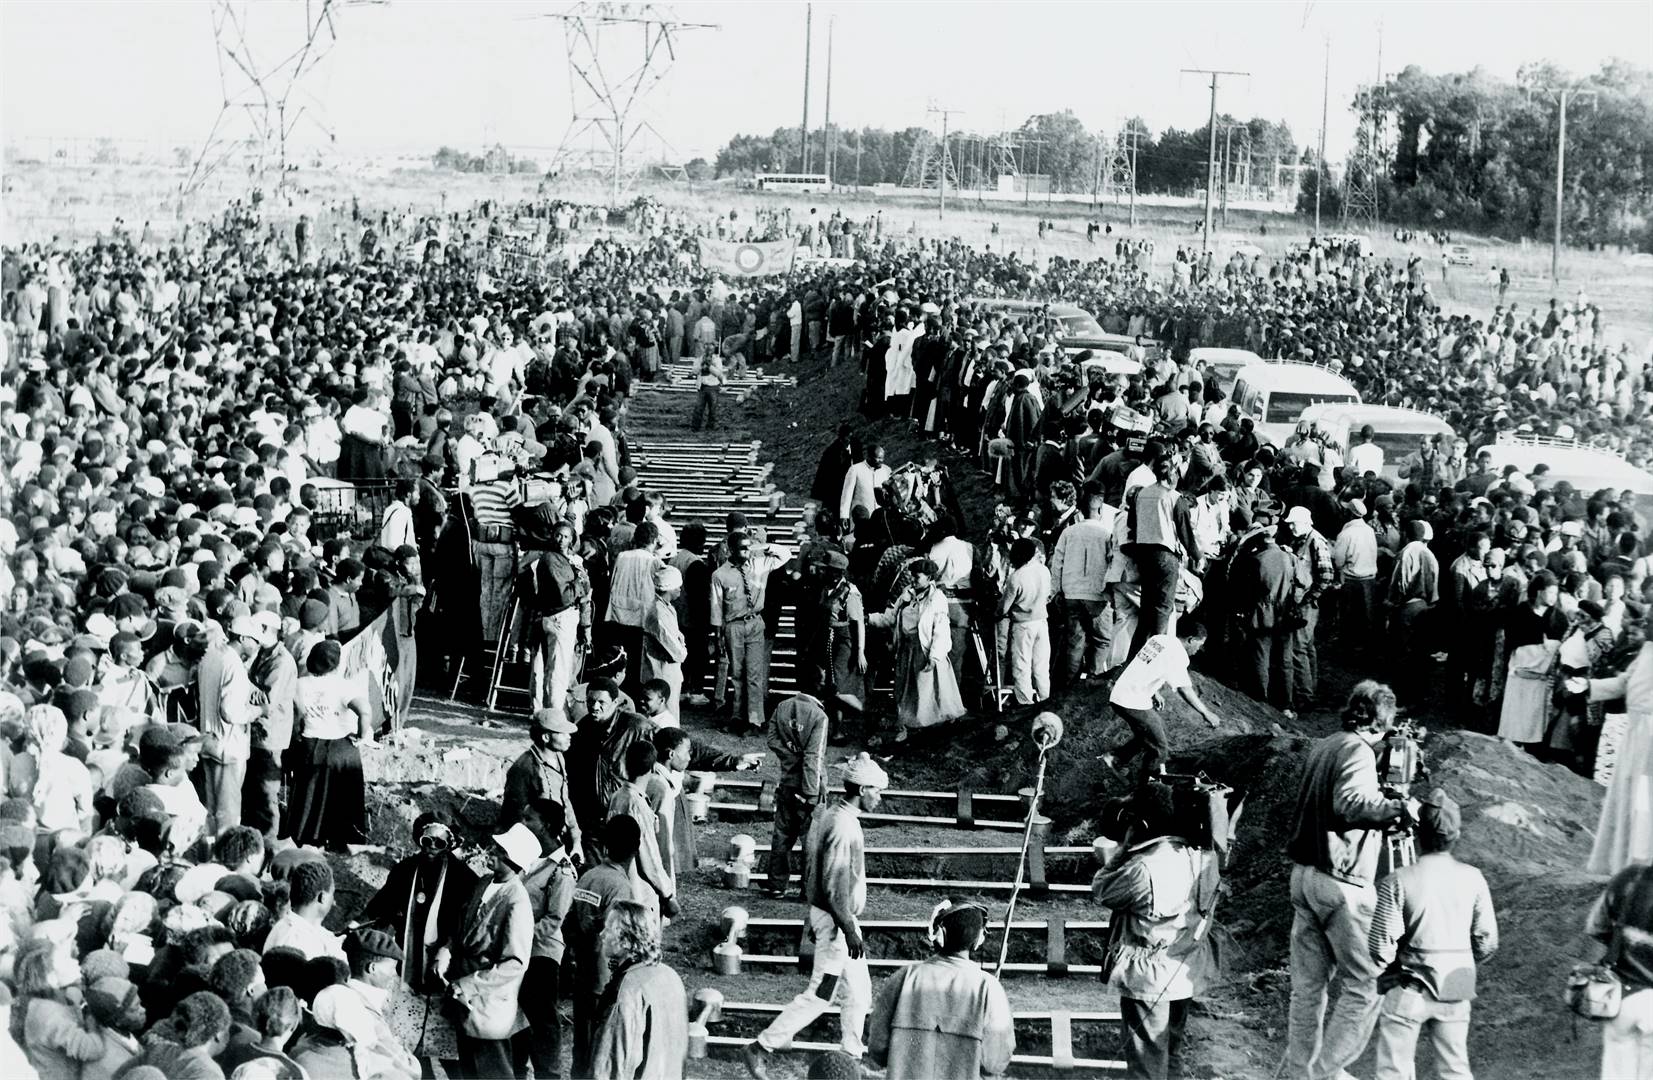 The funeral of the massacred. The site of the infamous Boipatong massacre on June 17 1992, when 46 township residents were massacred by local hostel dwellers when negotiations towards the end of apartheid were in progress. Photo: City Press Archives/Gallo Images